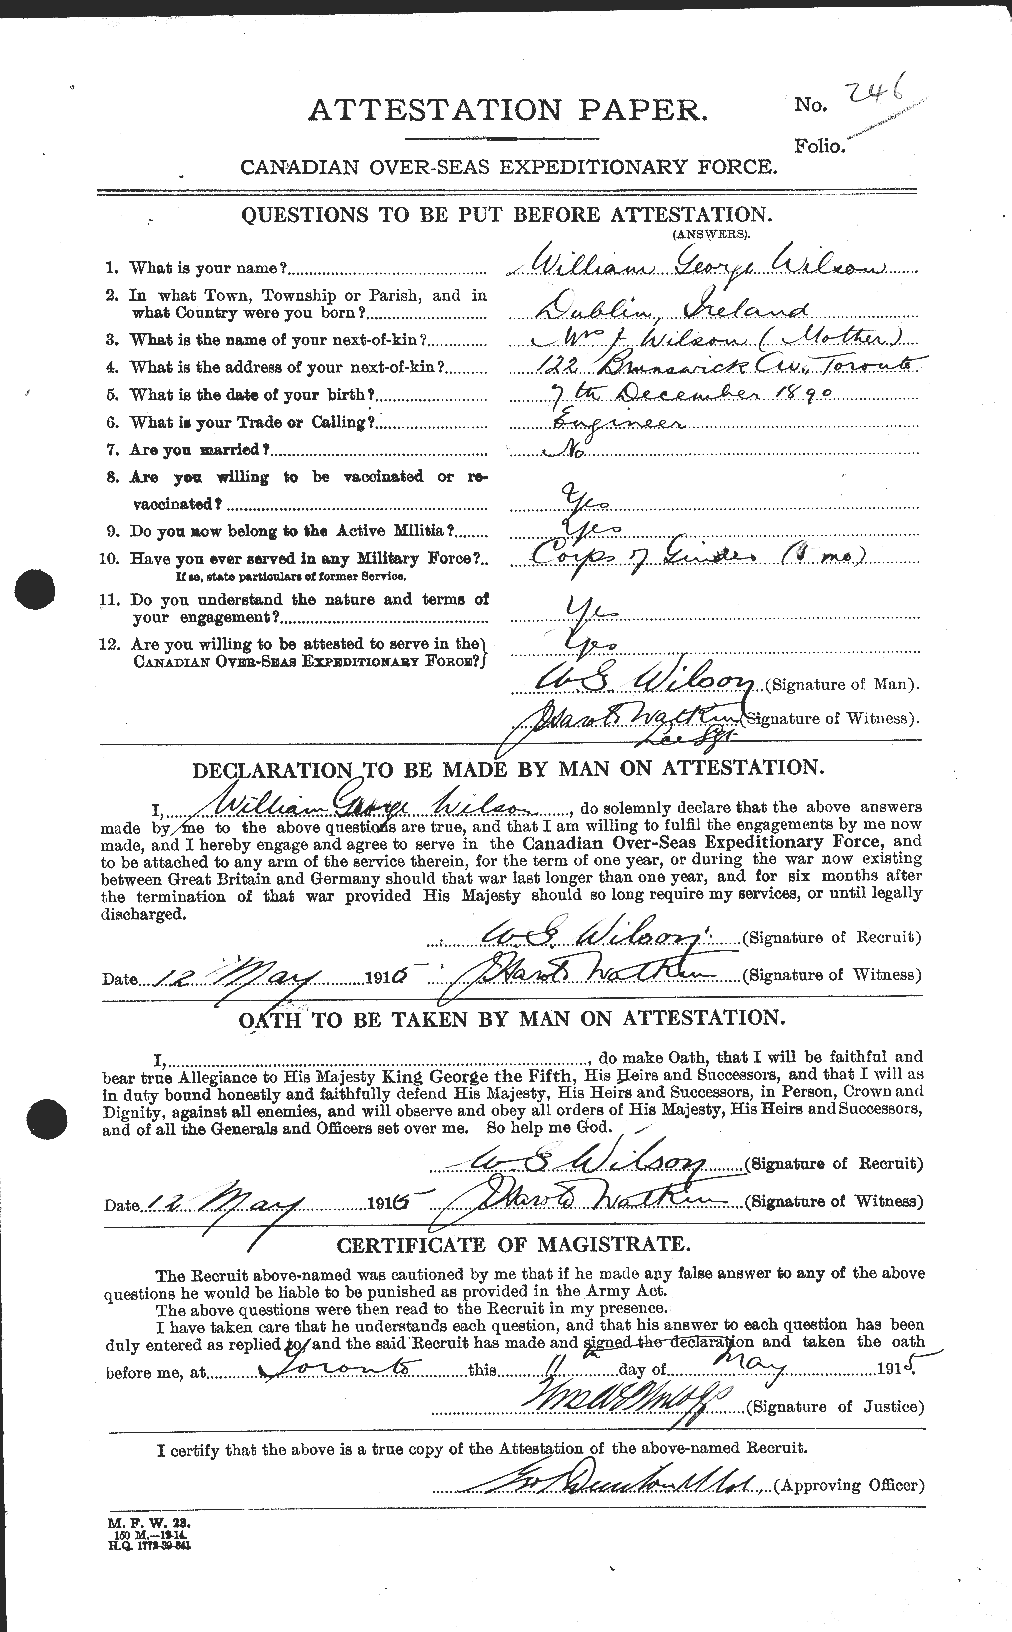 Personnel Records of the First World War - CEF 681999a